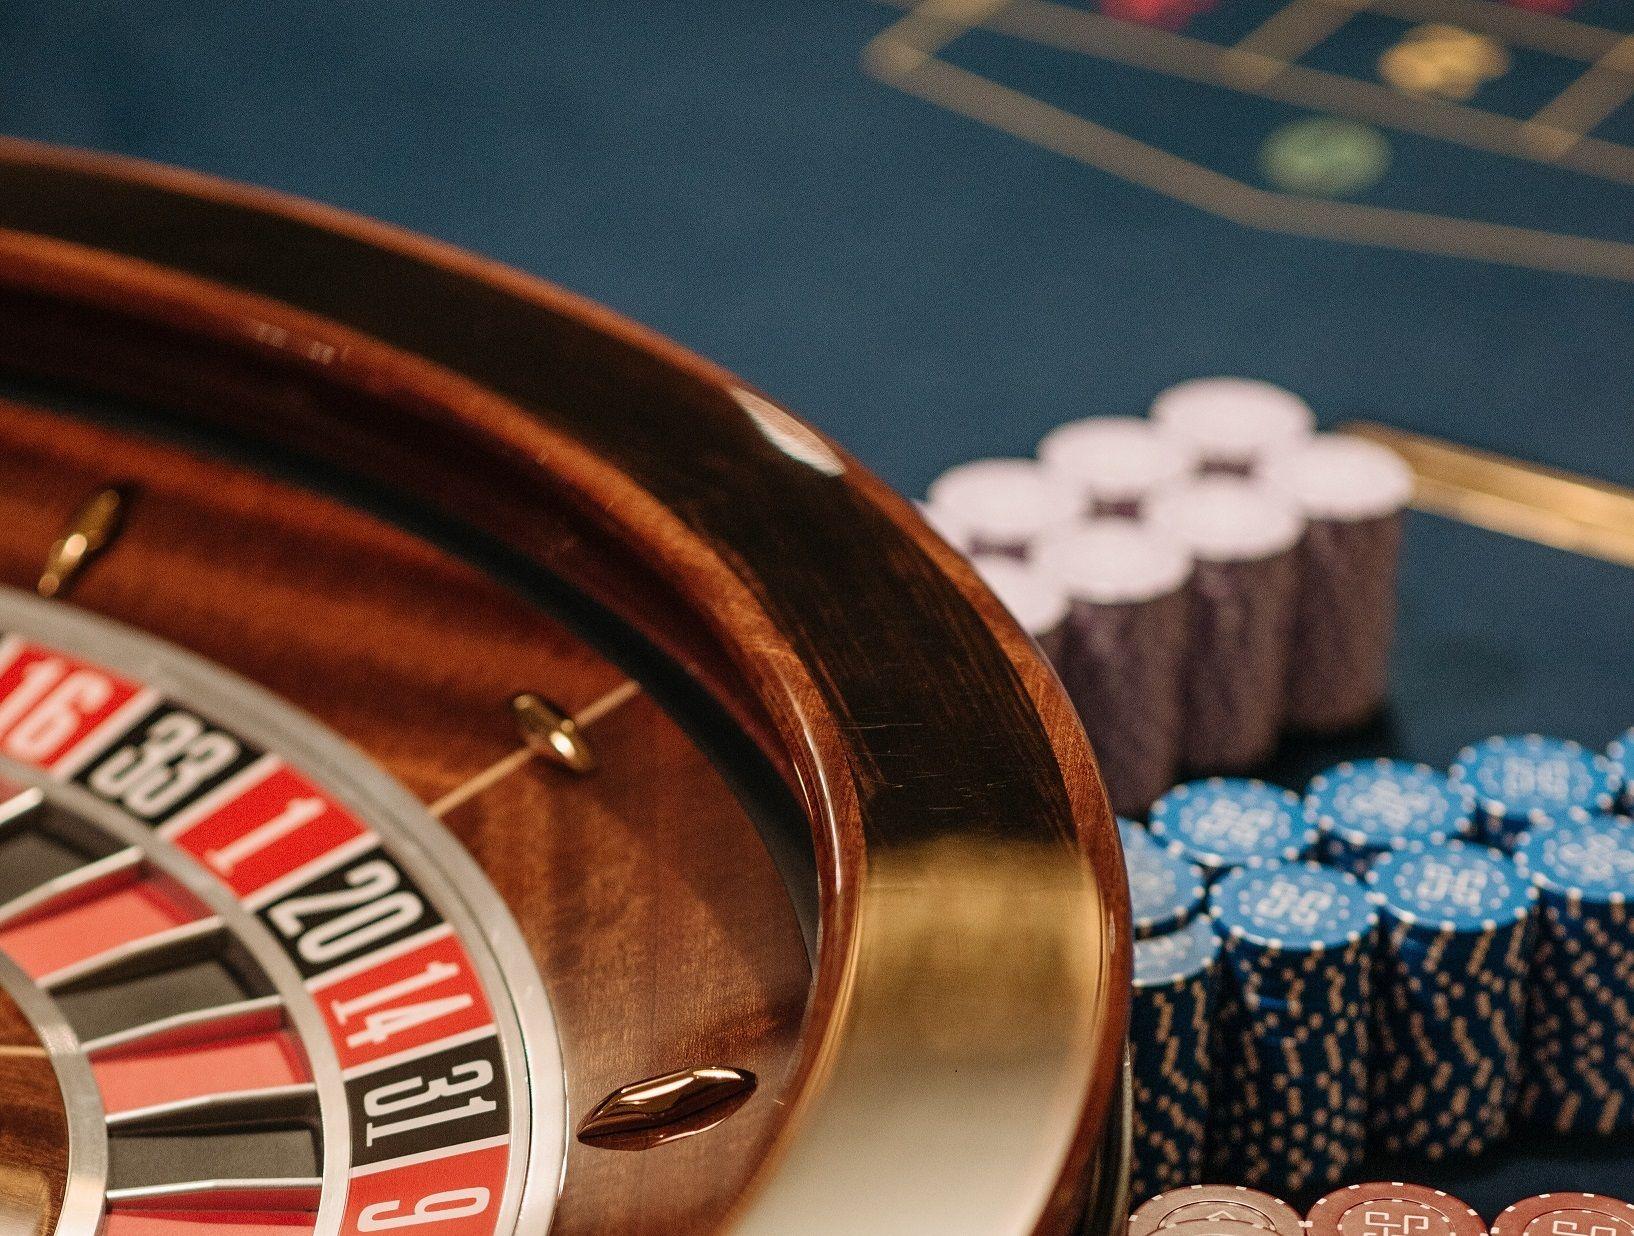 Pay N Play casinos: a new trend or a permanent change in the gaming industry?